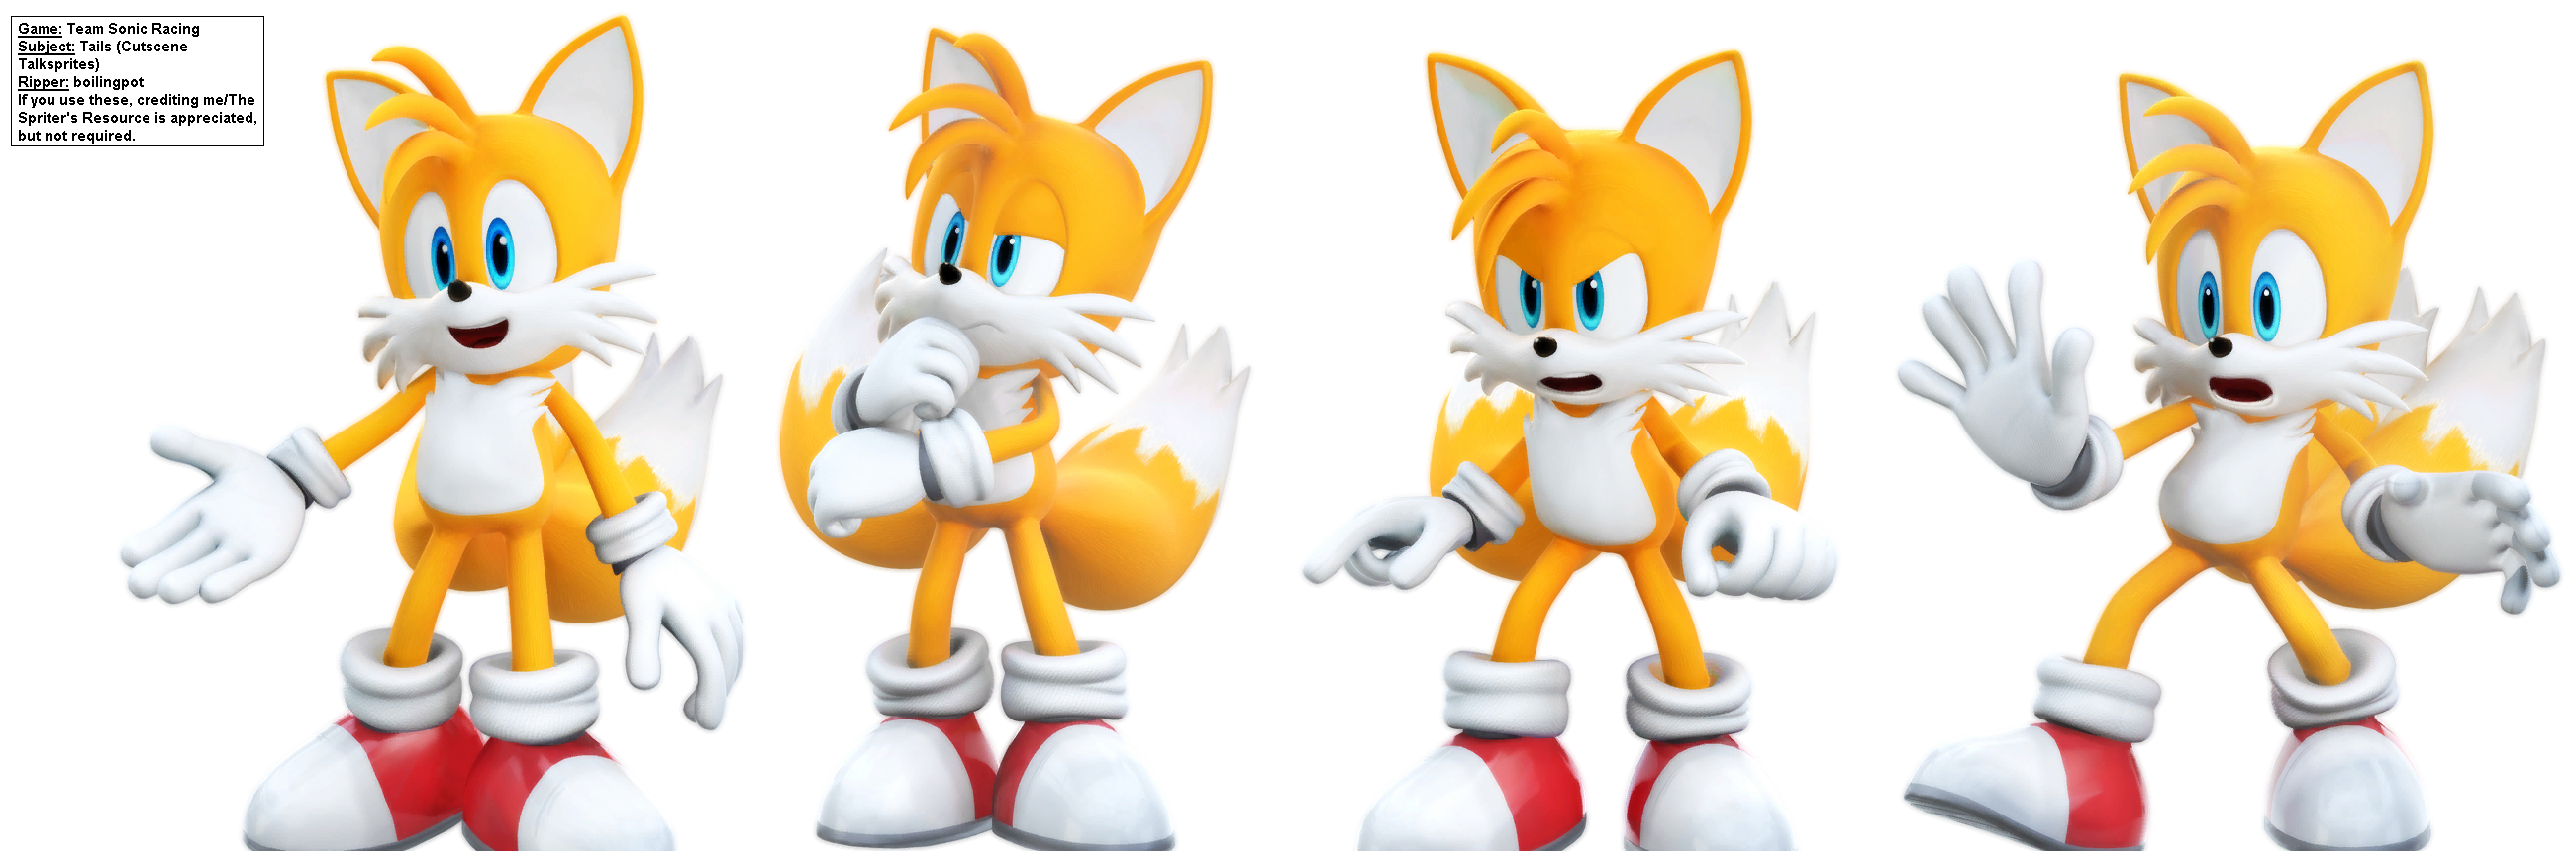 Team Sonic Racing - Miles "Tails" Prower